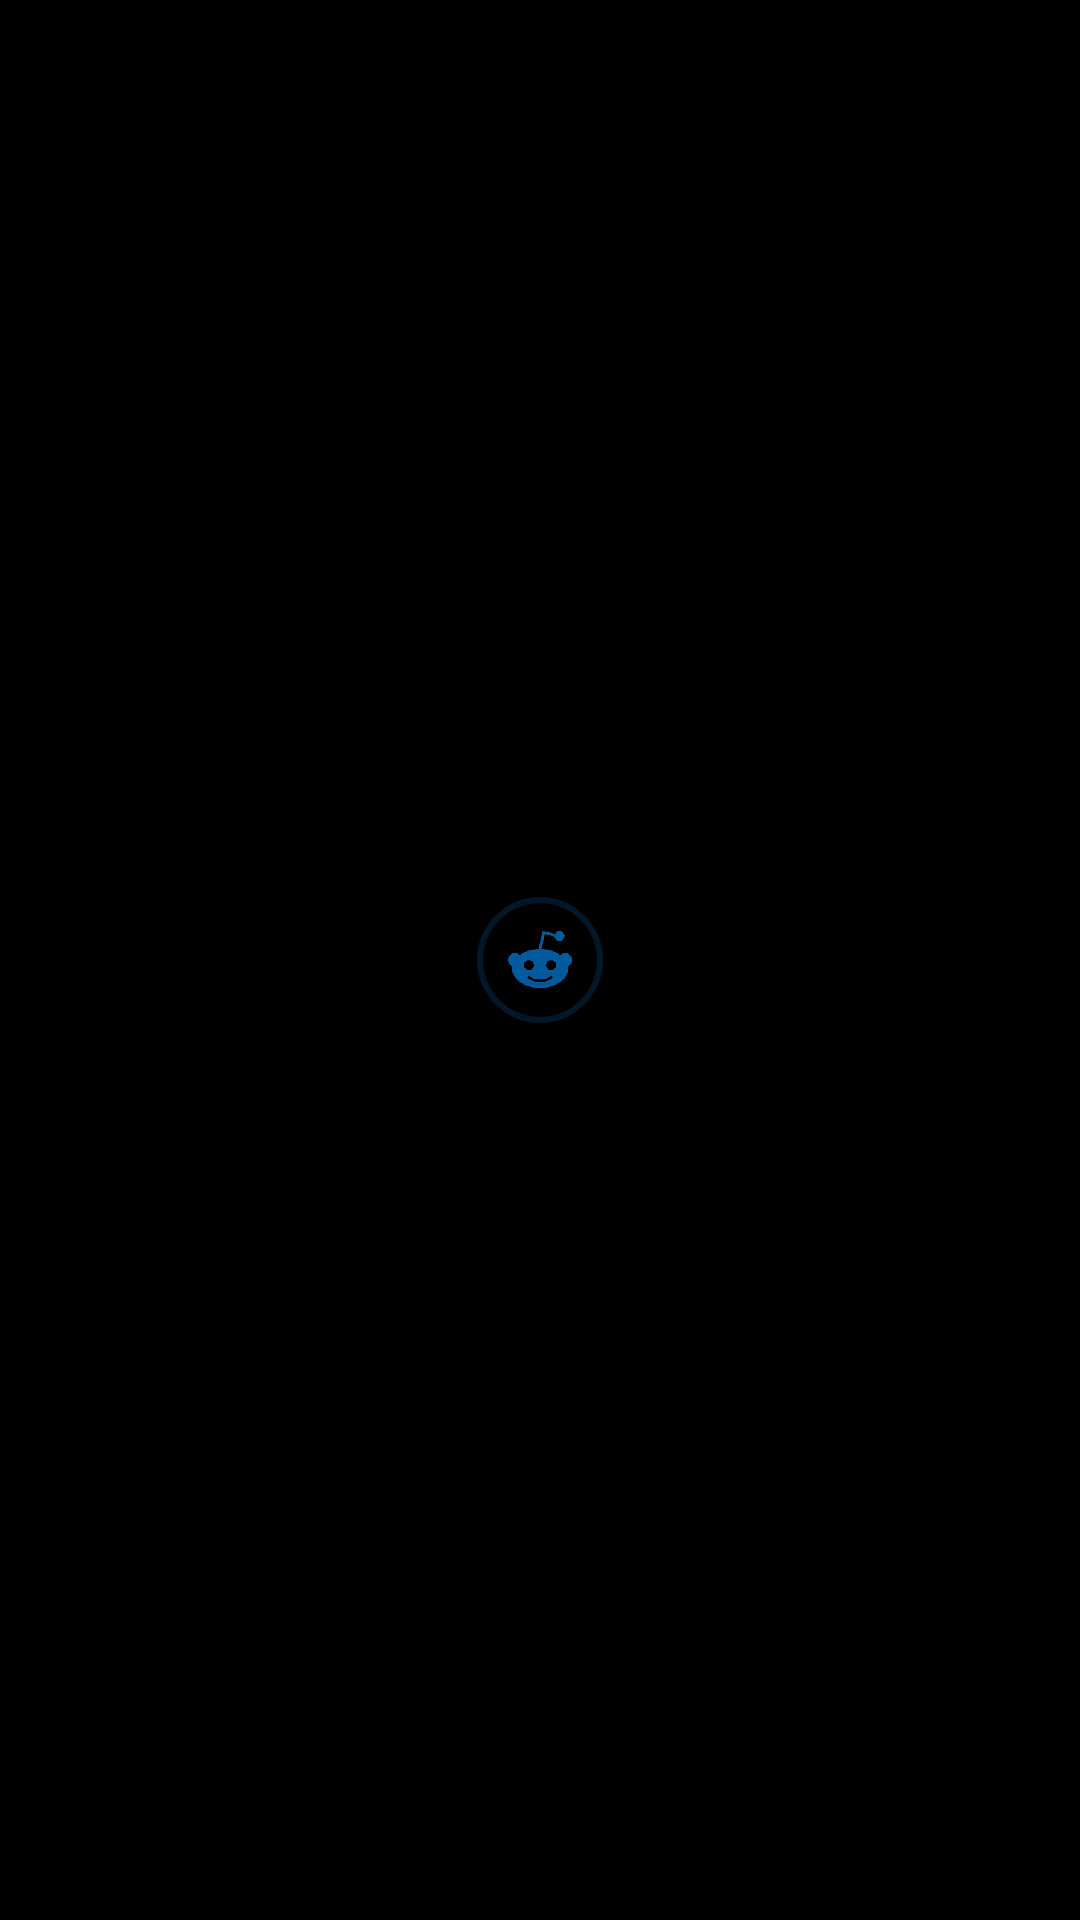 1080x1920Anybody realized the reddit loading screen makes a